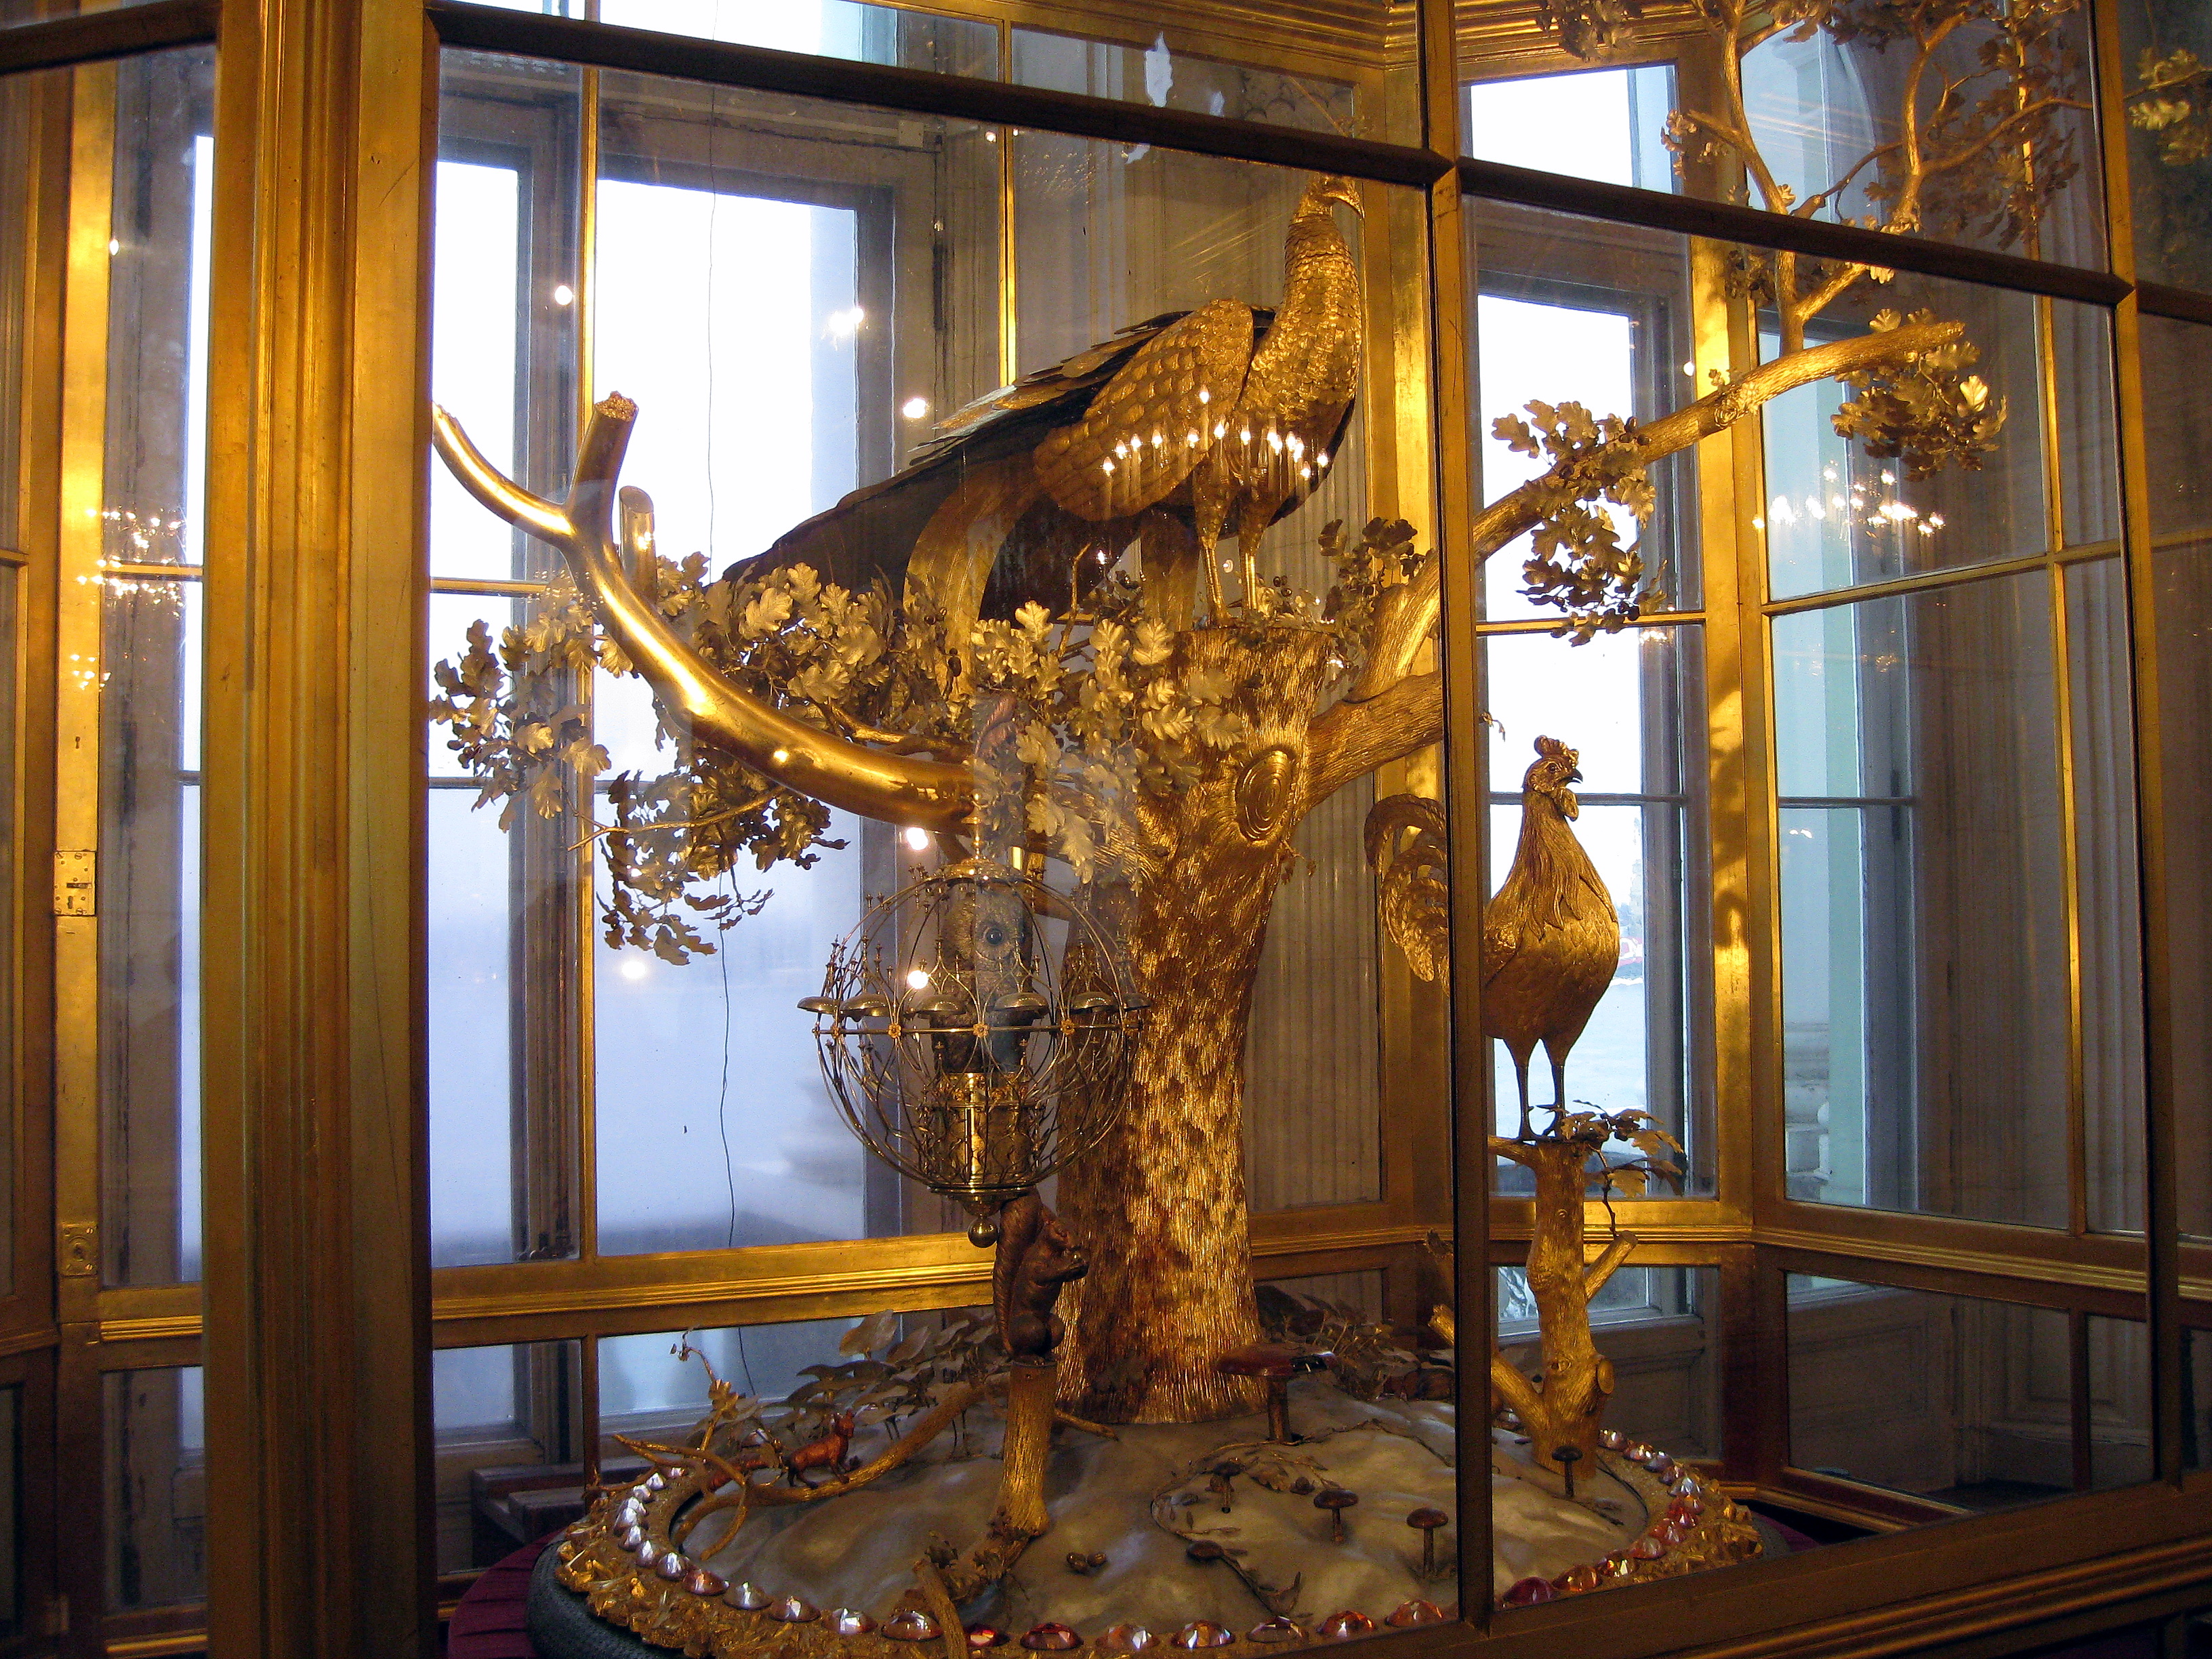 The Peacock Clock, Northern Birds, and Automatons | Alberti’s Window